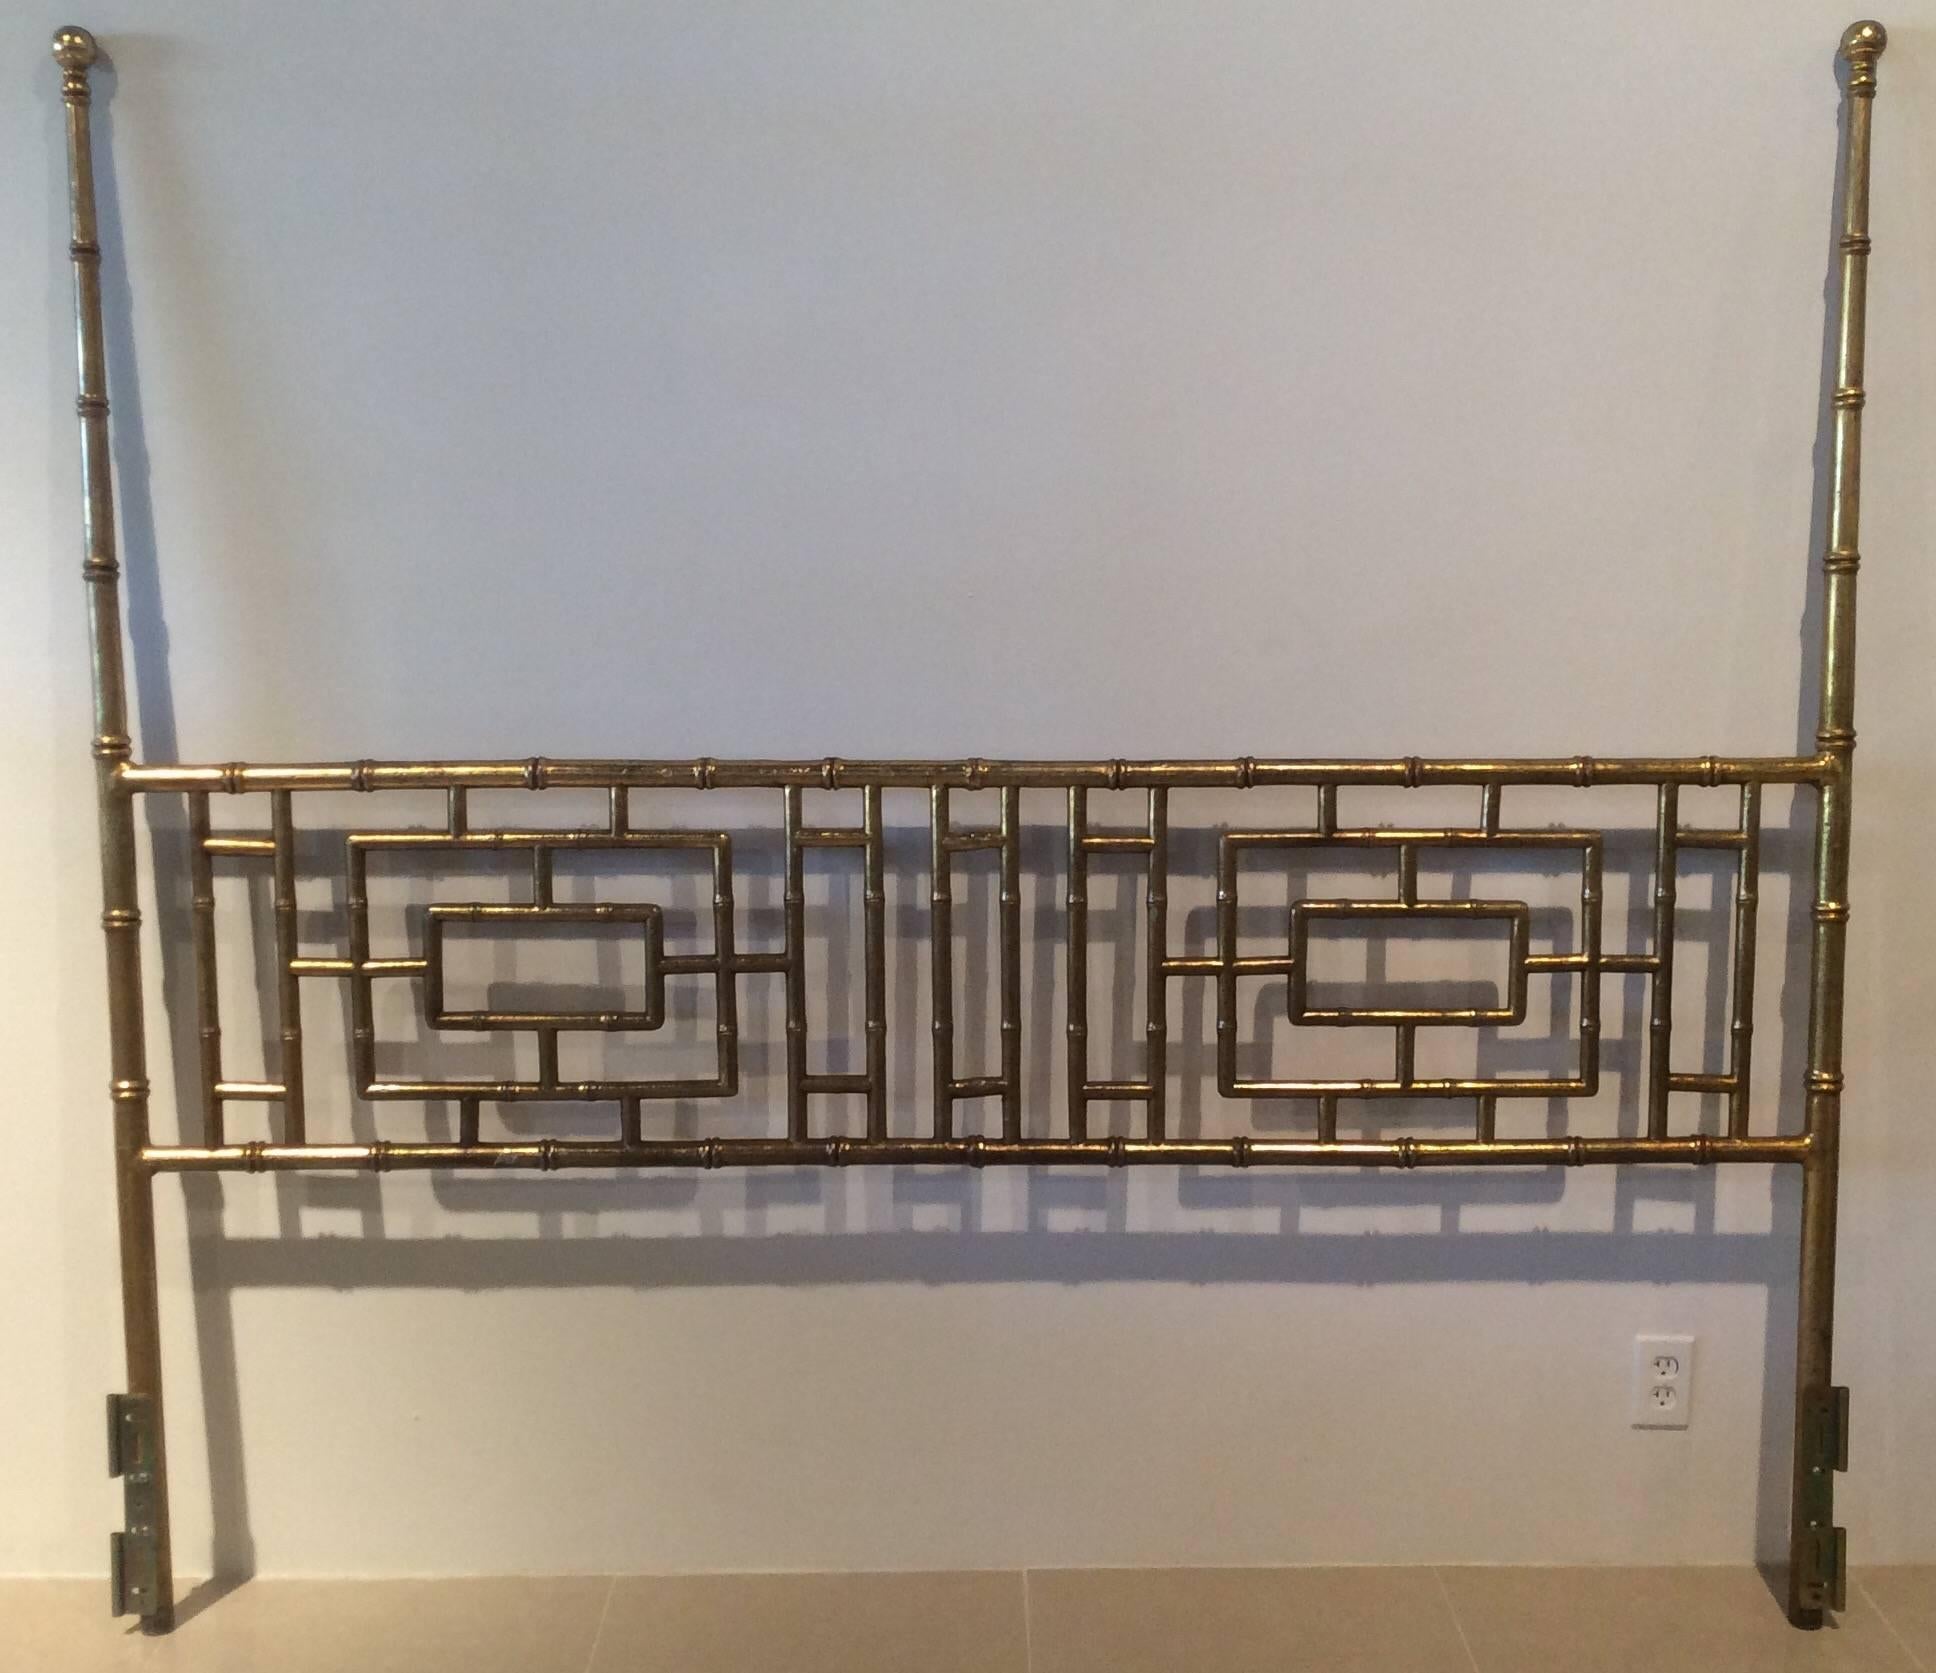 Vintage Hollywood Regency, Chinese Chippendale, faux bamboo, metal, gold gilt finish, king-size headboard bed. Wonderful geometric pattern. Perfect for that elegant Palm Beach, Chinoiserie feel!